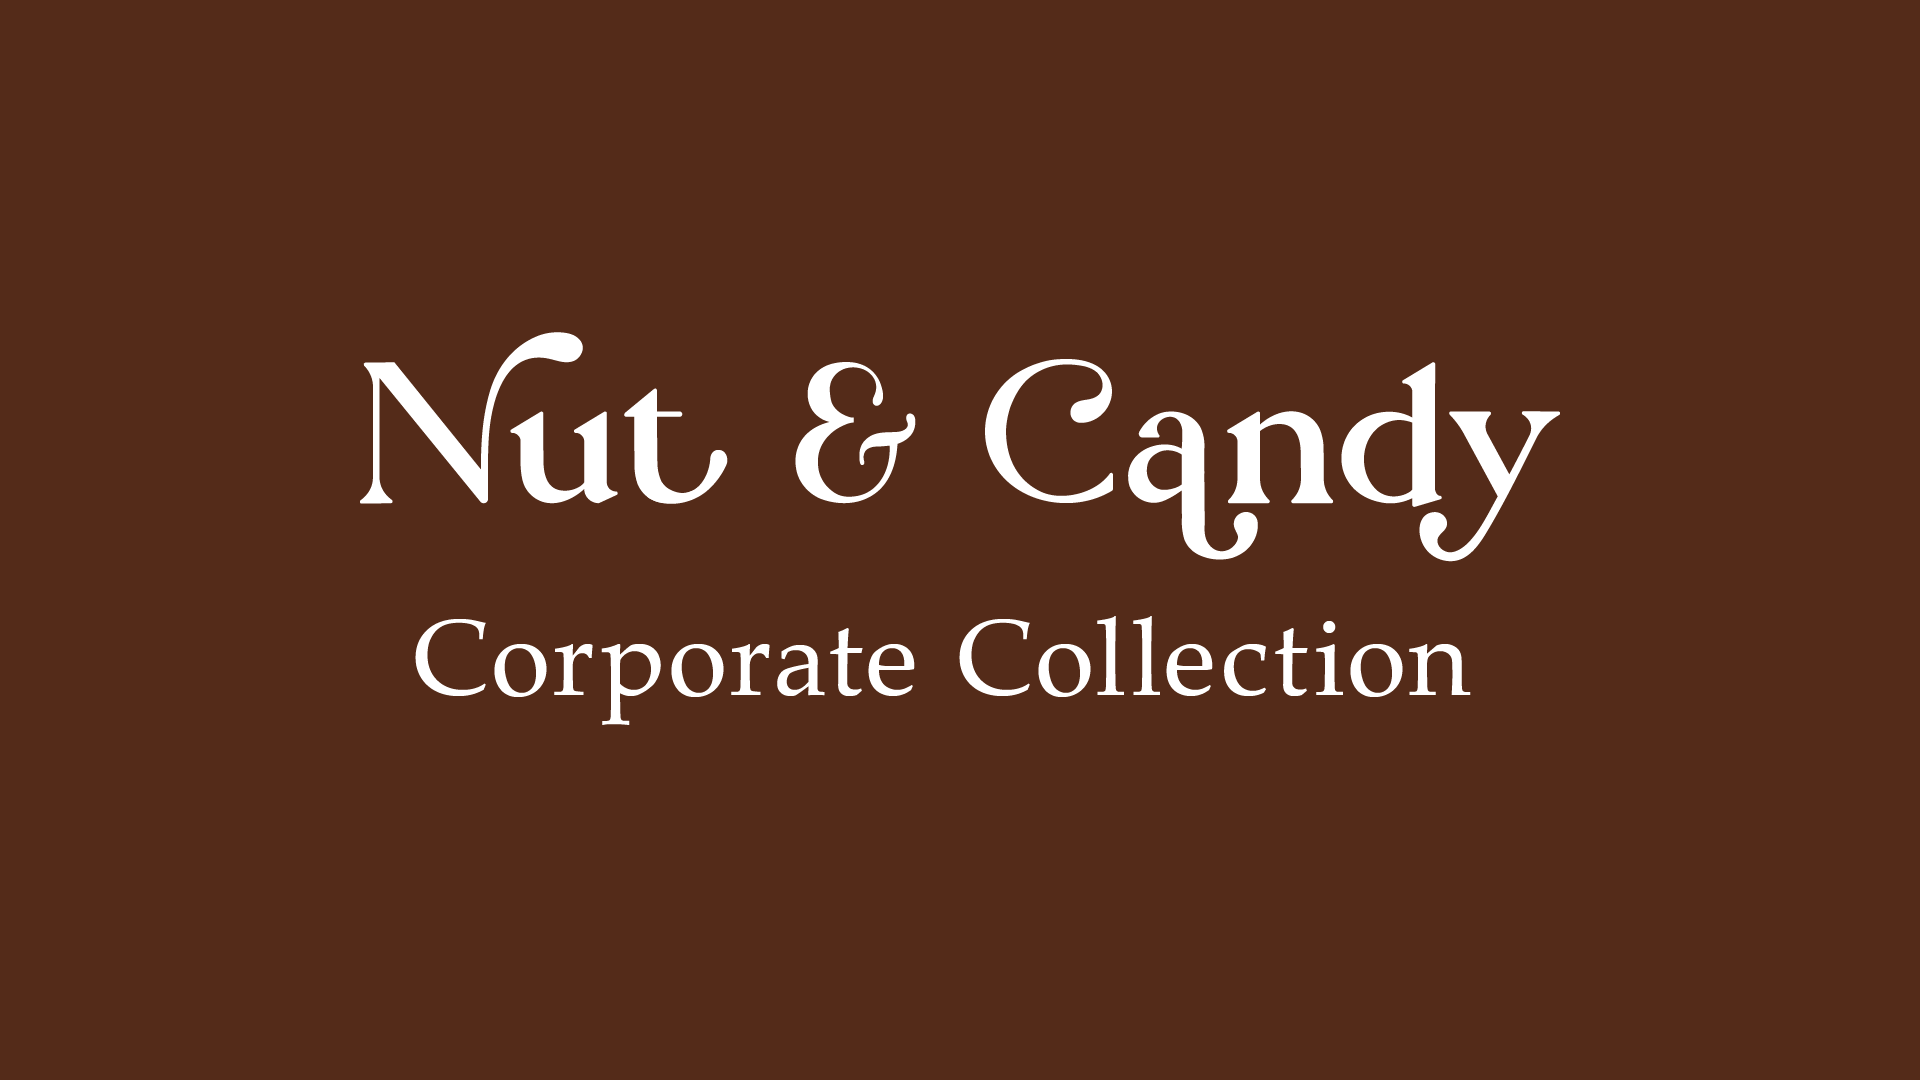 Load video: Video showing corporate collection confections.